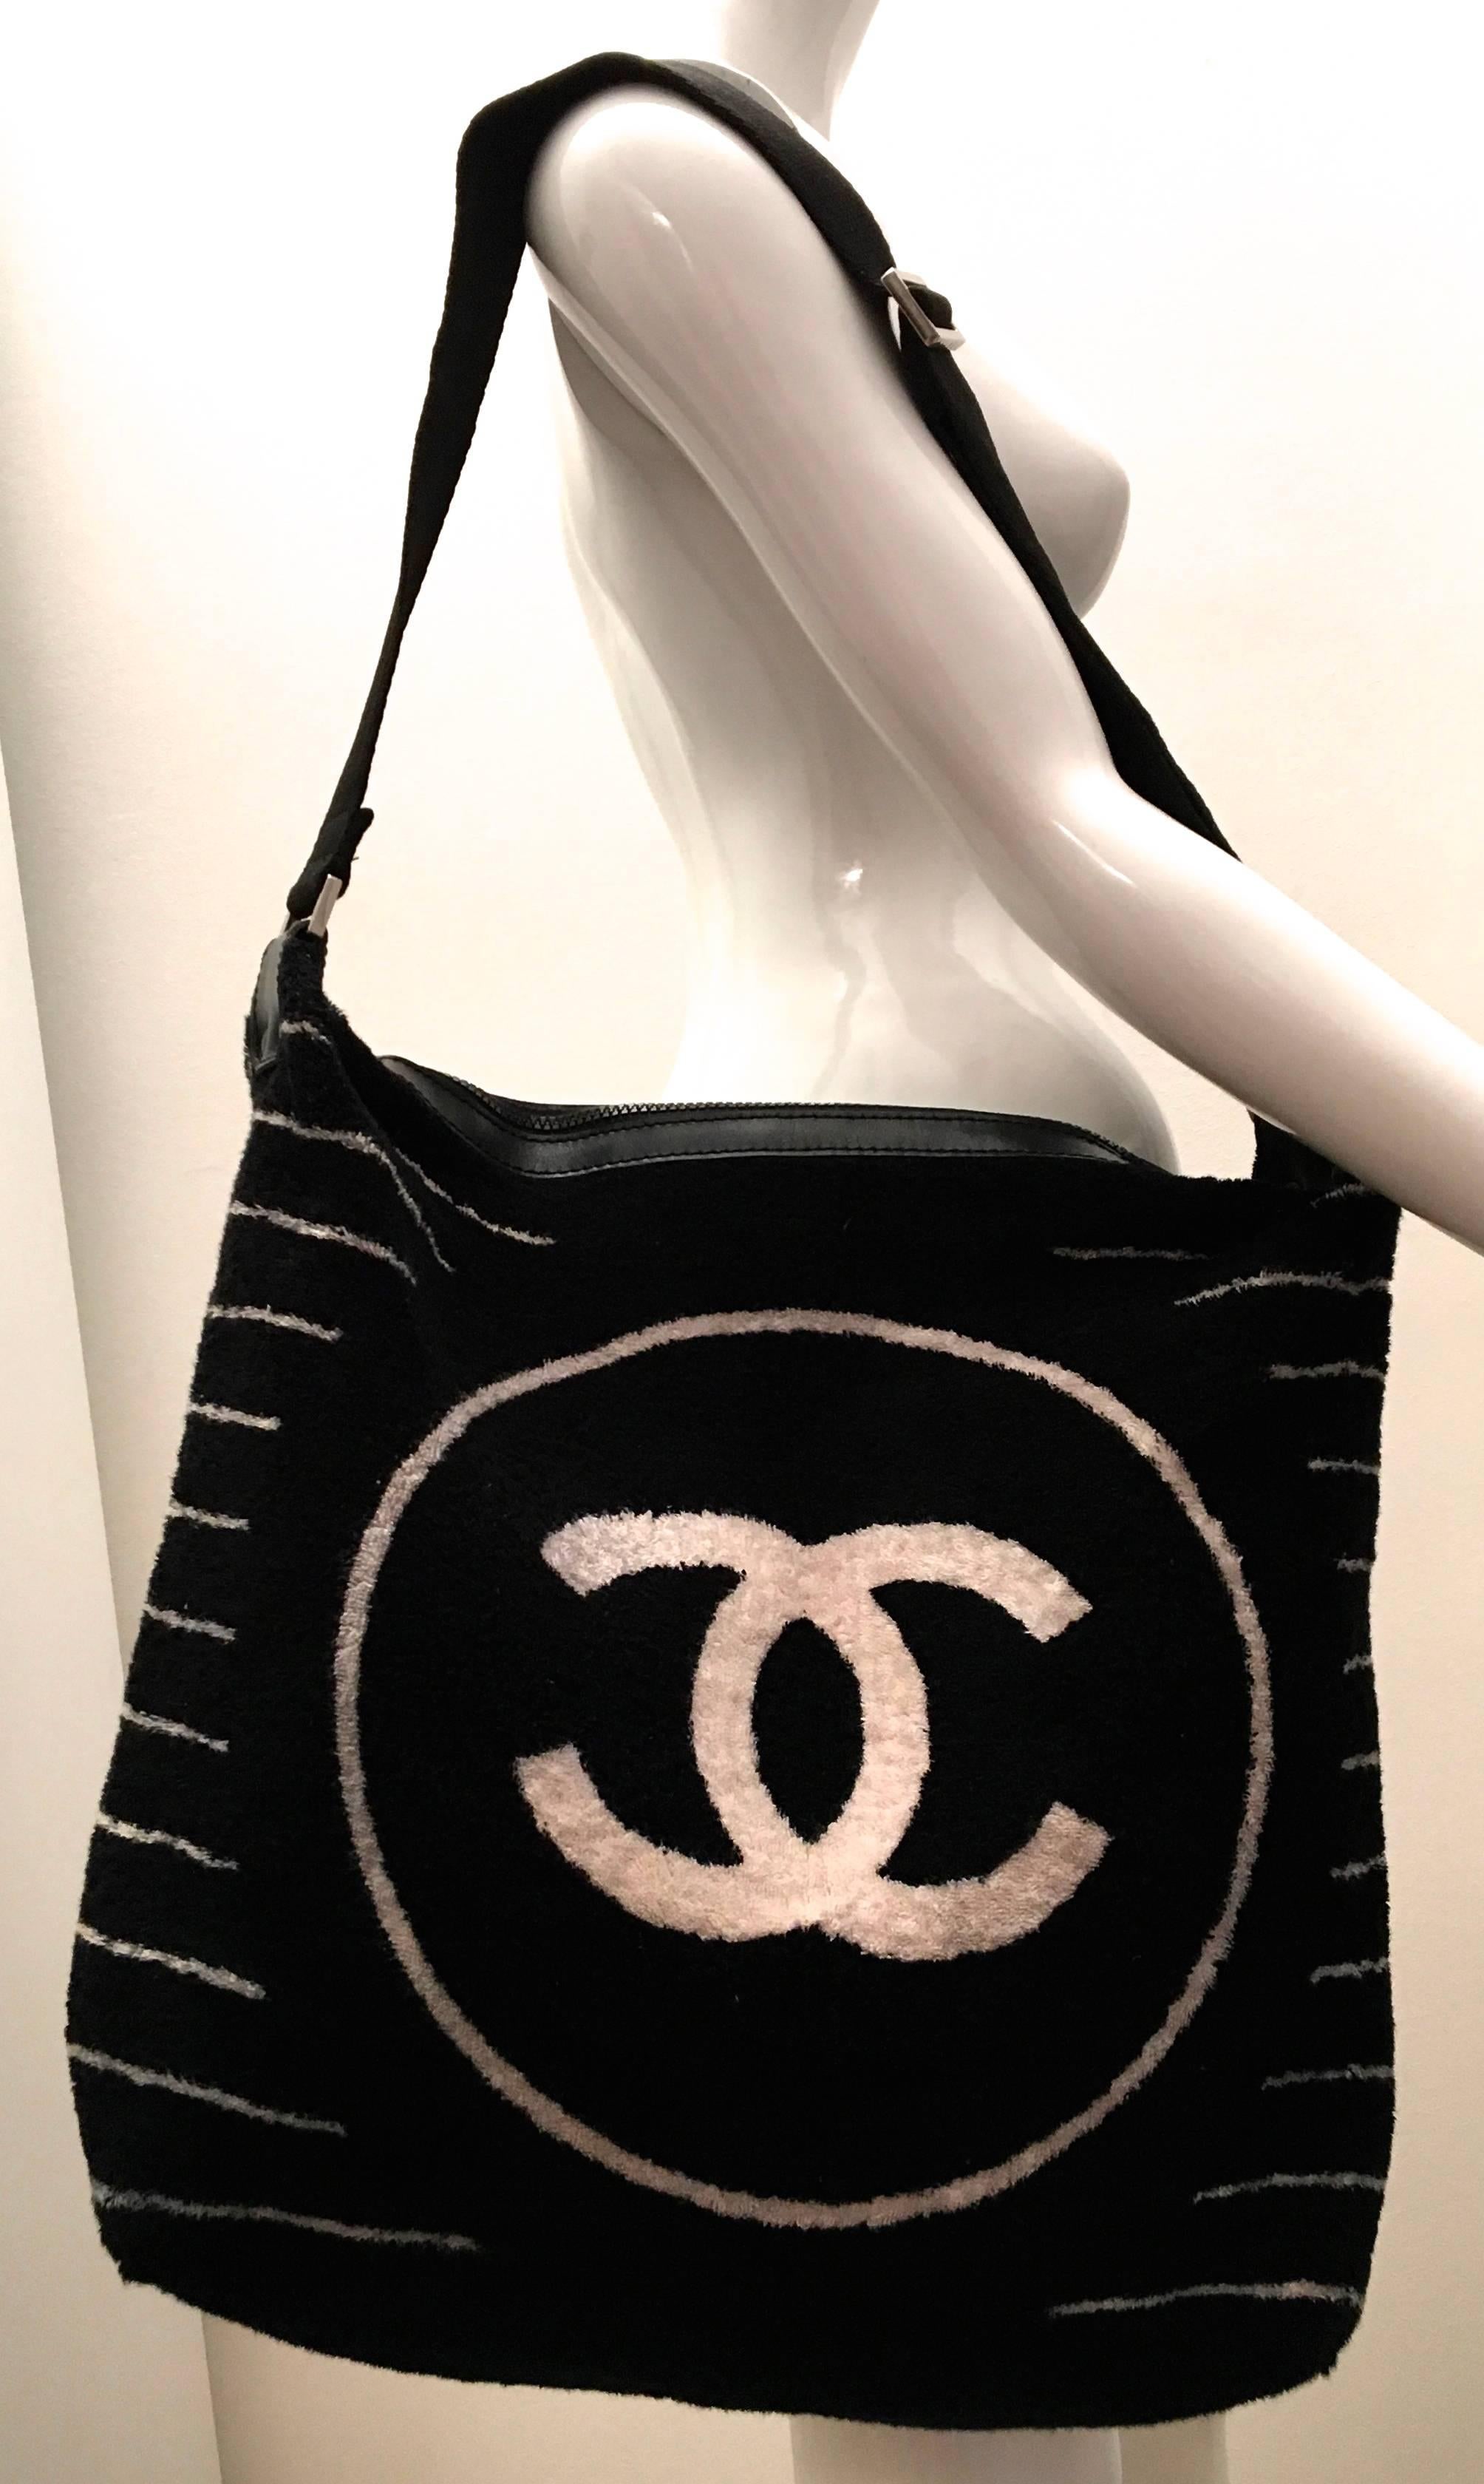 Presented here is a rare Chanel black terry cloth shoulder bag. This fantastic bag has a singular main compartment that has sufficient storage room for most normal necessities for a day out. There is a small pouch at the top the bag. The exterior